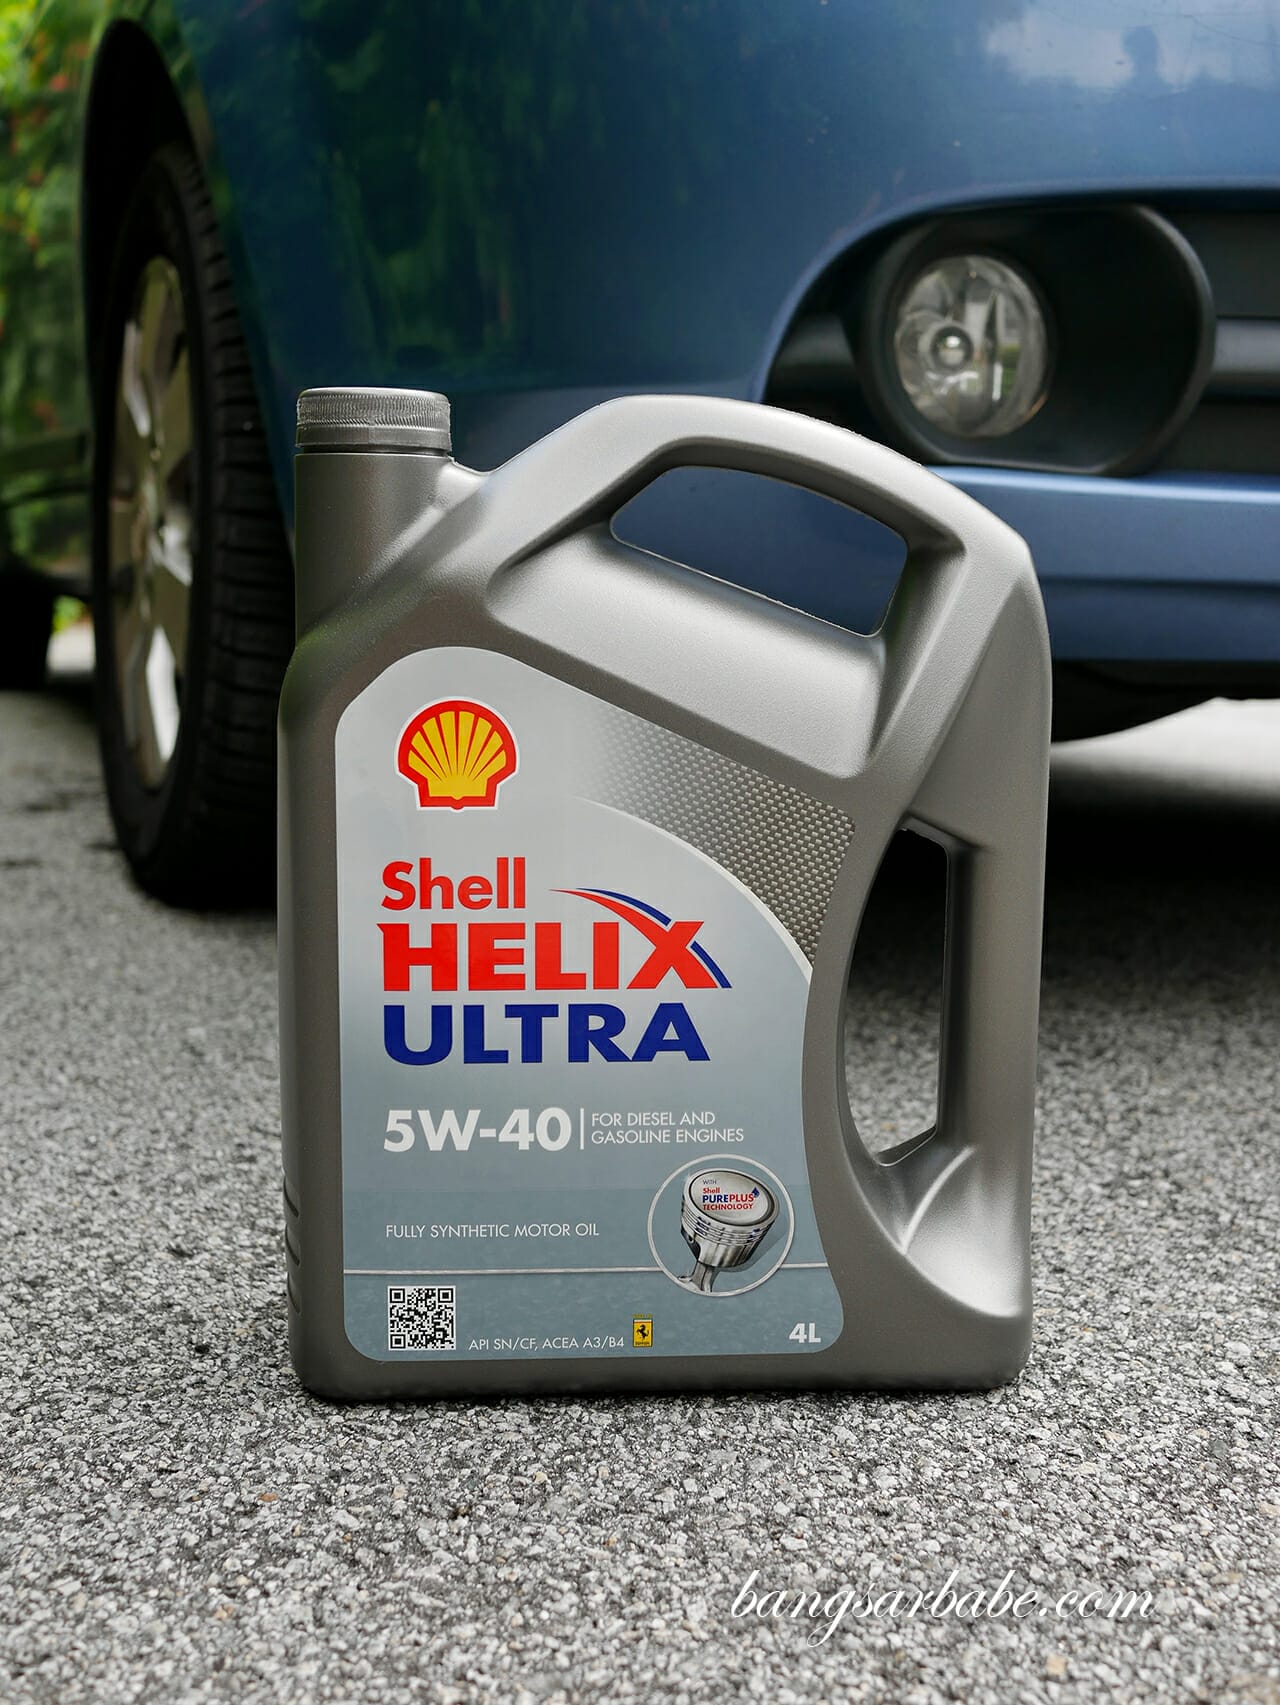 Caption: The S.H.E.W. warranty applies for every purchase of Shell Helix Ultra with PurePlus Technology and Shell Helix HX7